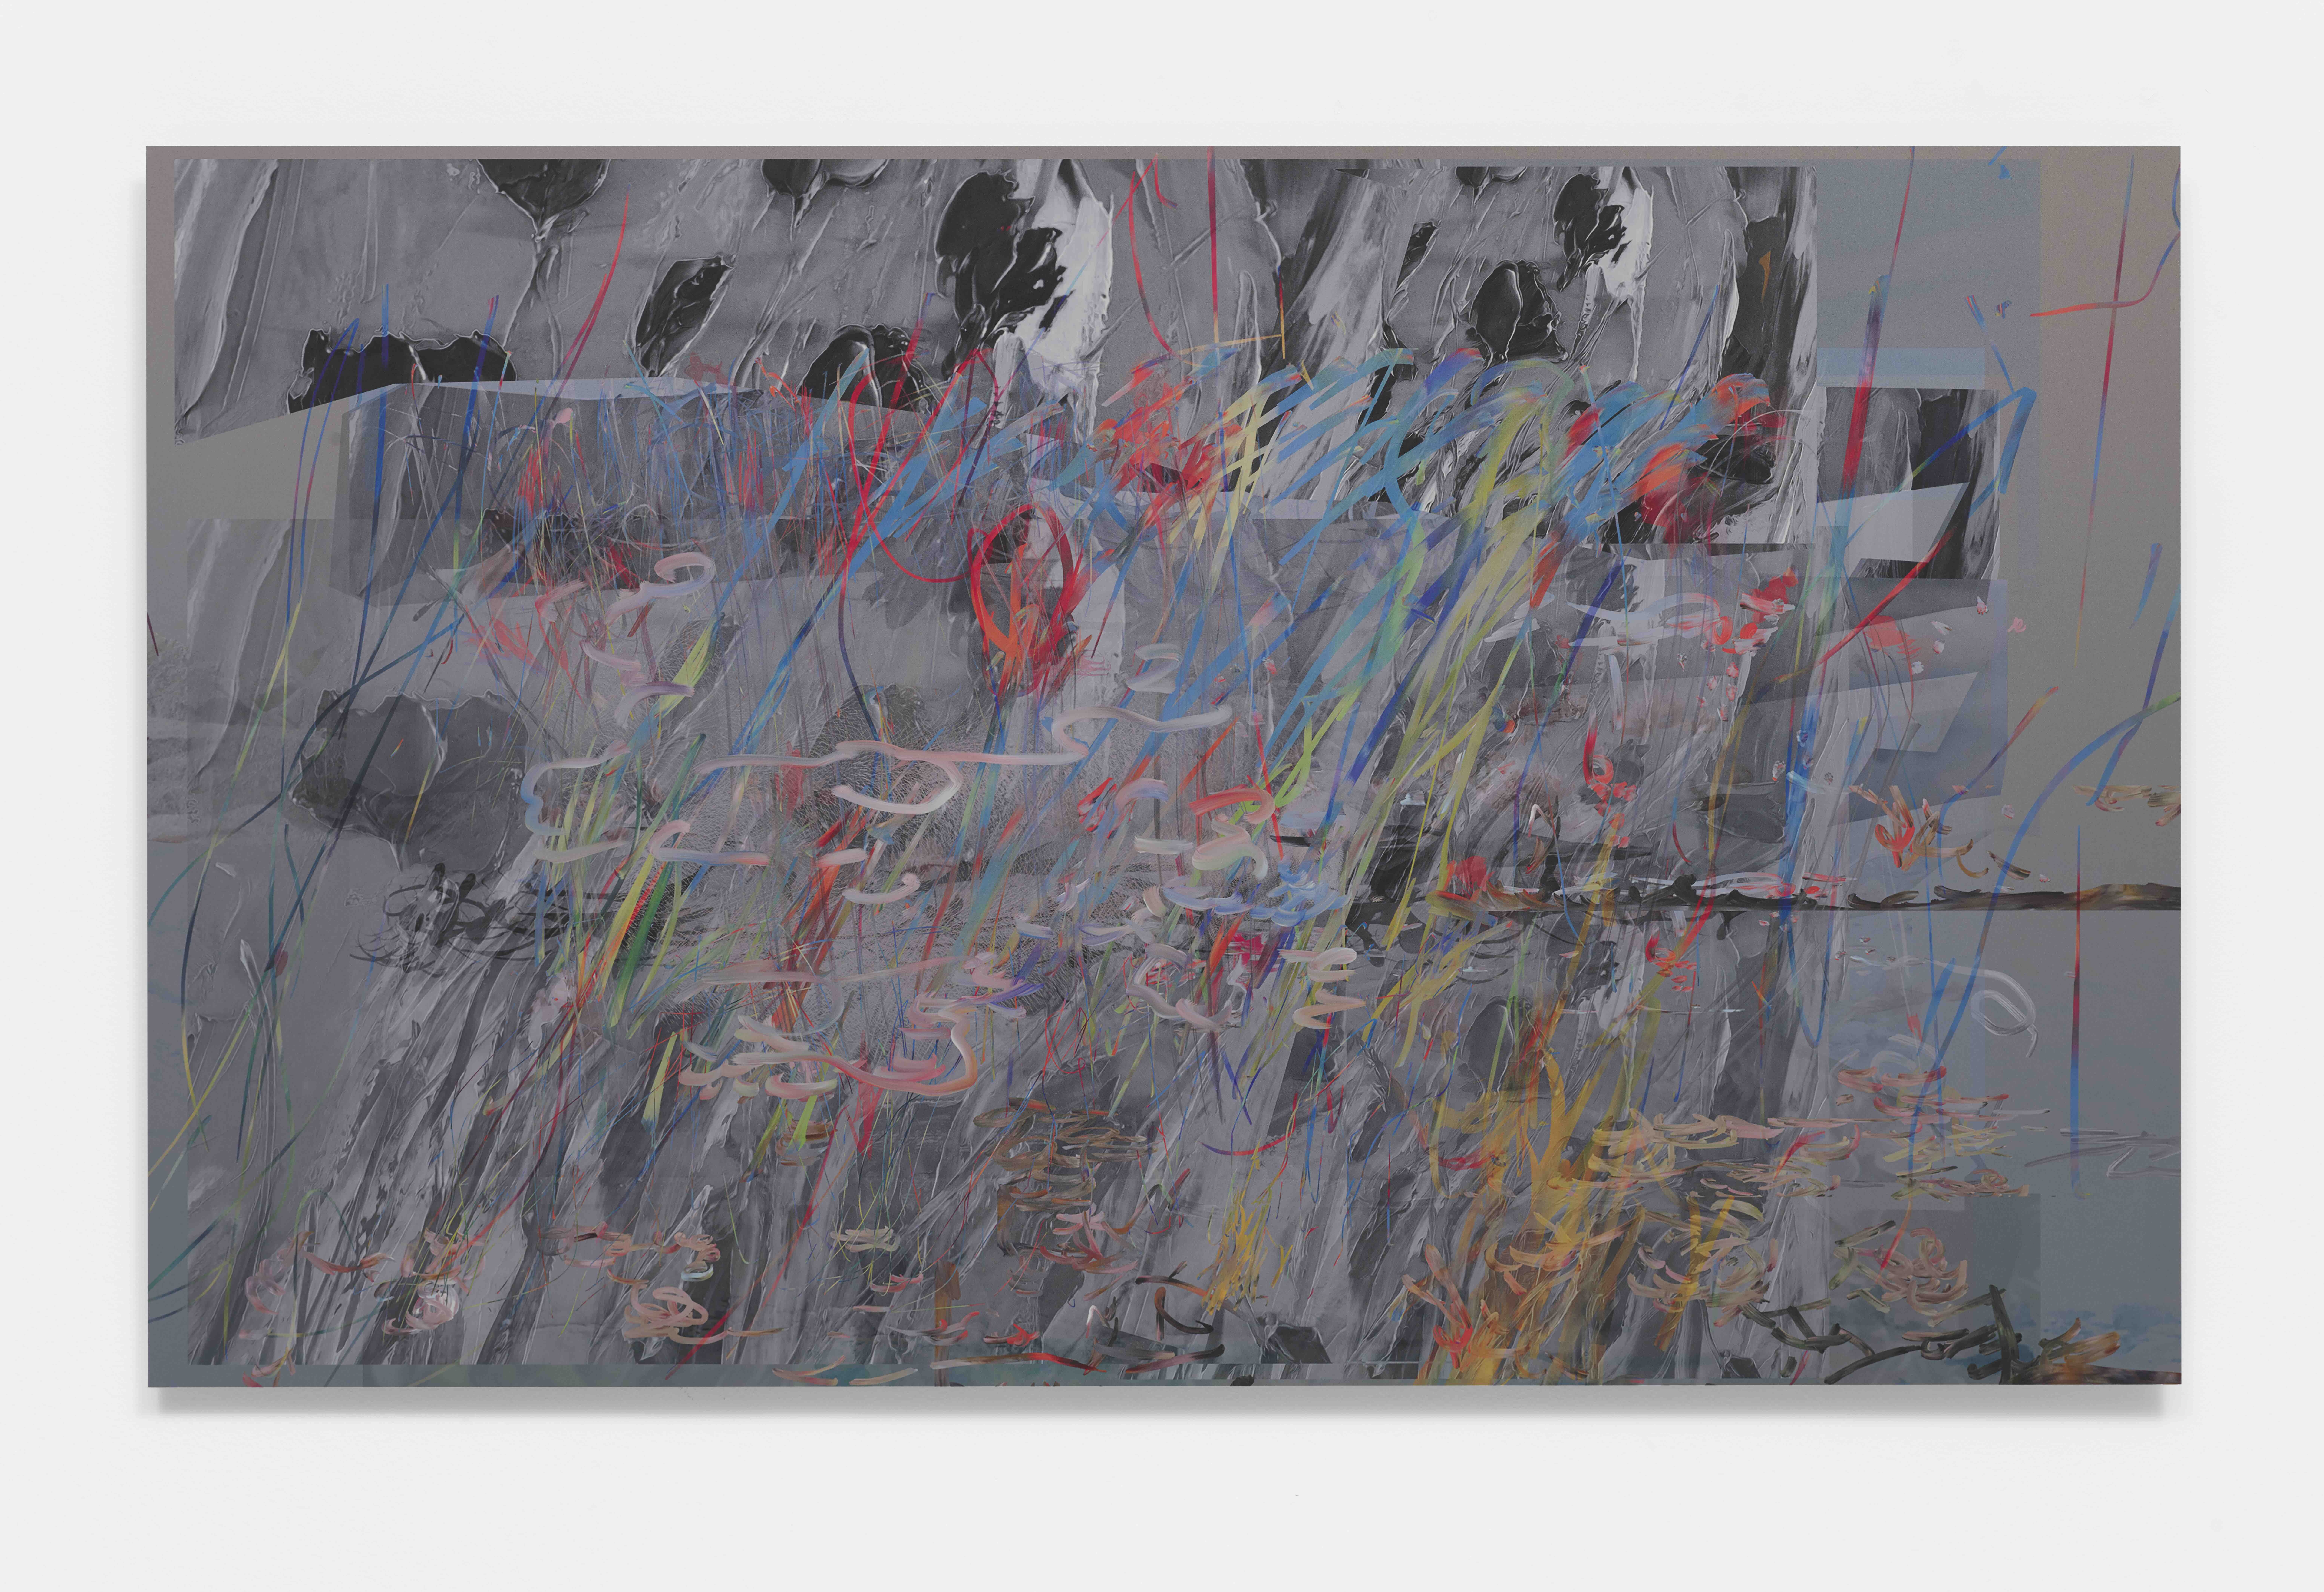 Petra Cortright, CONNECTICUT LIGHT AND POWER cool win 98 themes +country +home +magazine, 2021, digital painting on anodised aluminium, 74.30 x 121.92cm, 1301SW. Image courtesy of the artist and 1301SW, Melbourne.